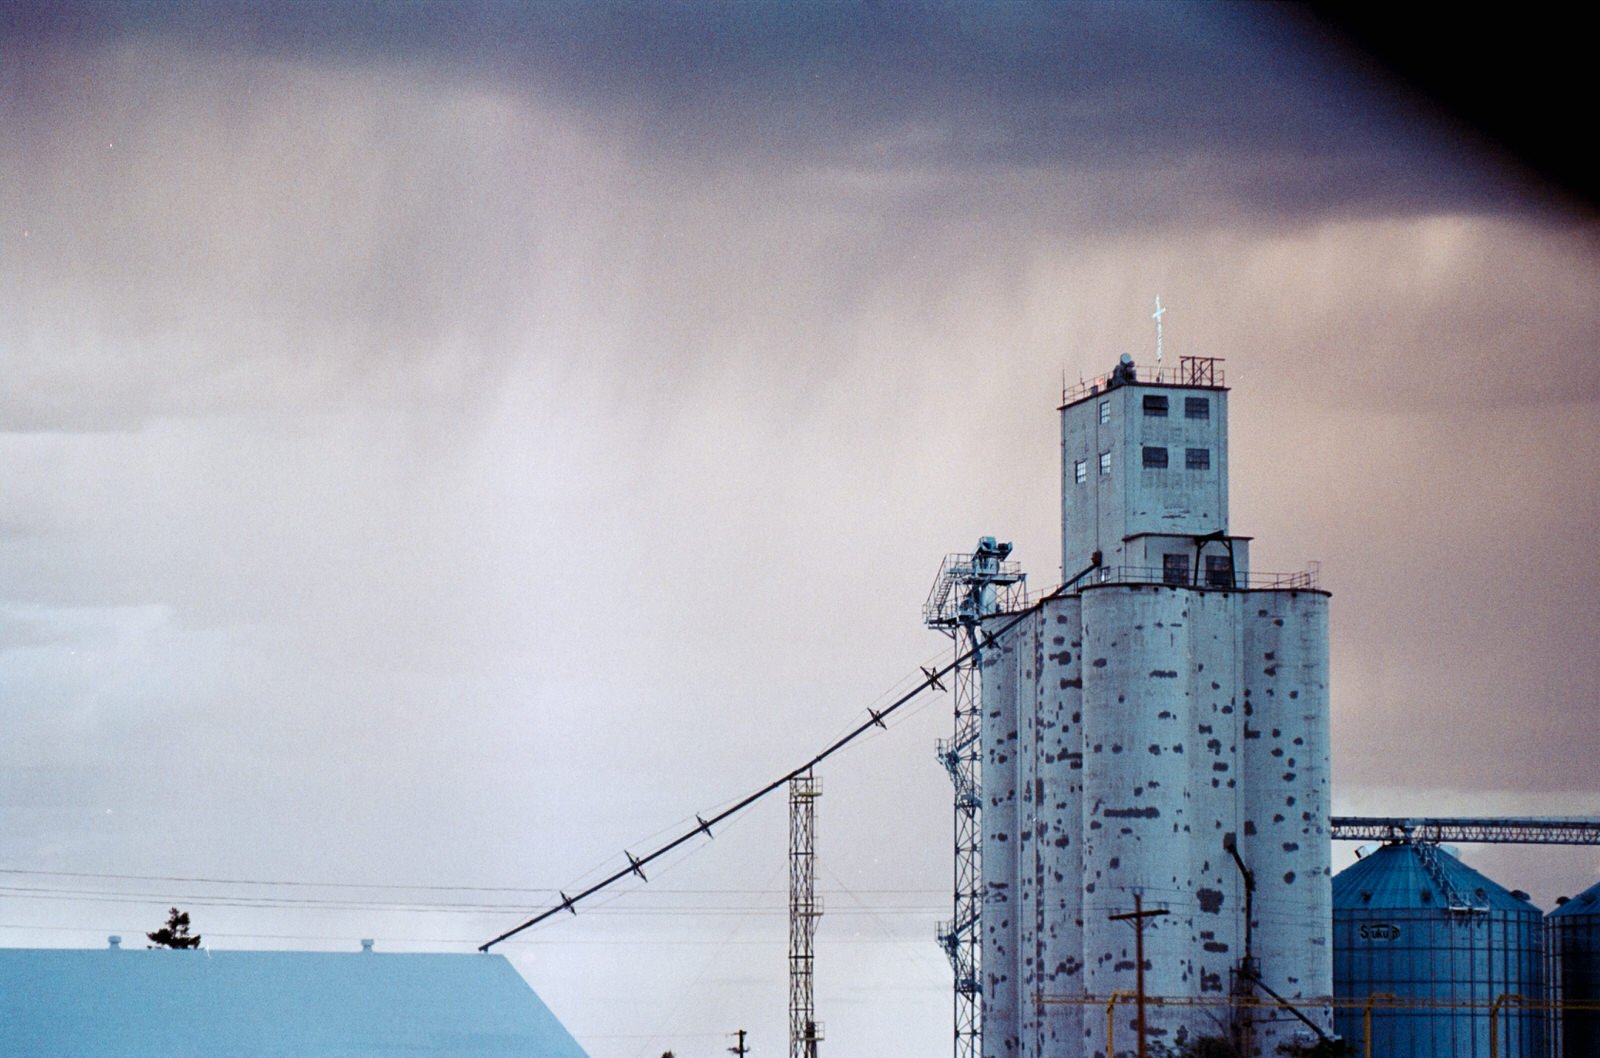 Seeing the storm hitting miles away against the the large silos that weather it all and help support the farmers.